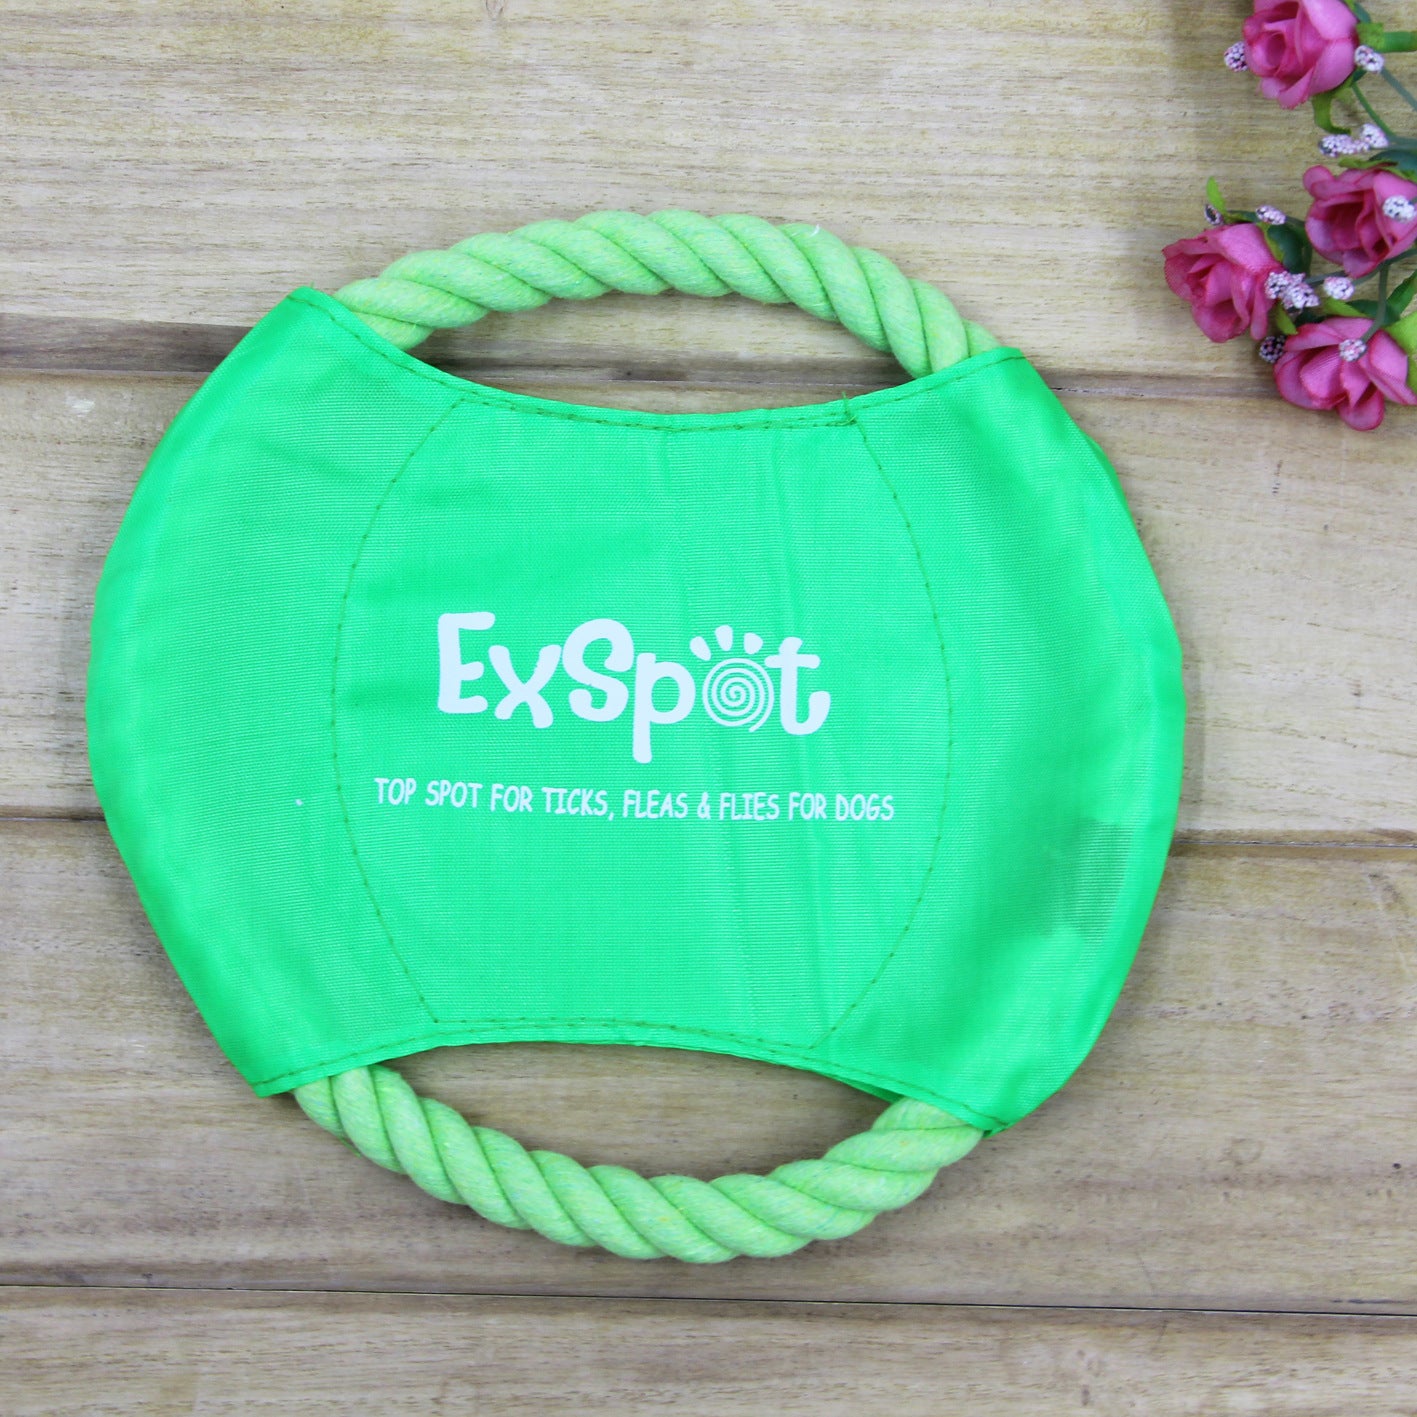 ExSpot Outdoor Flying Rope Toy for Dogs